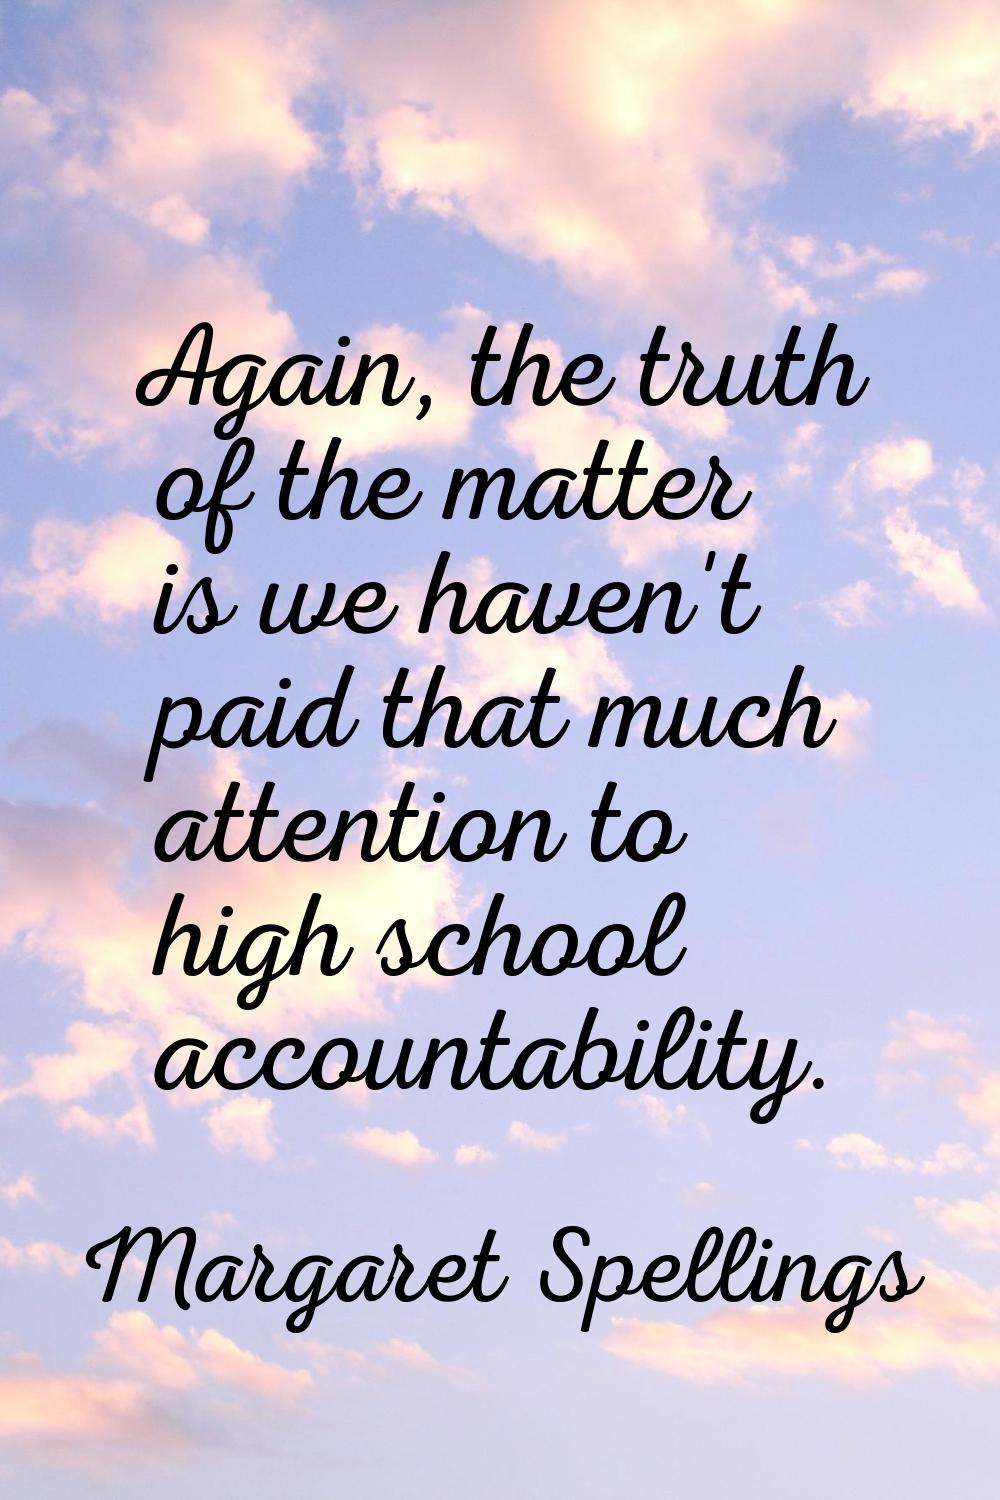 Again, the truth of the matter is we haven't paid that much attention to high school accountability